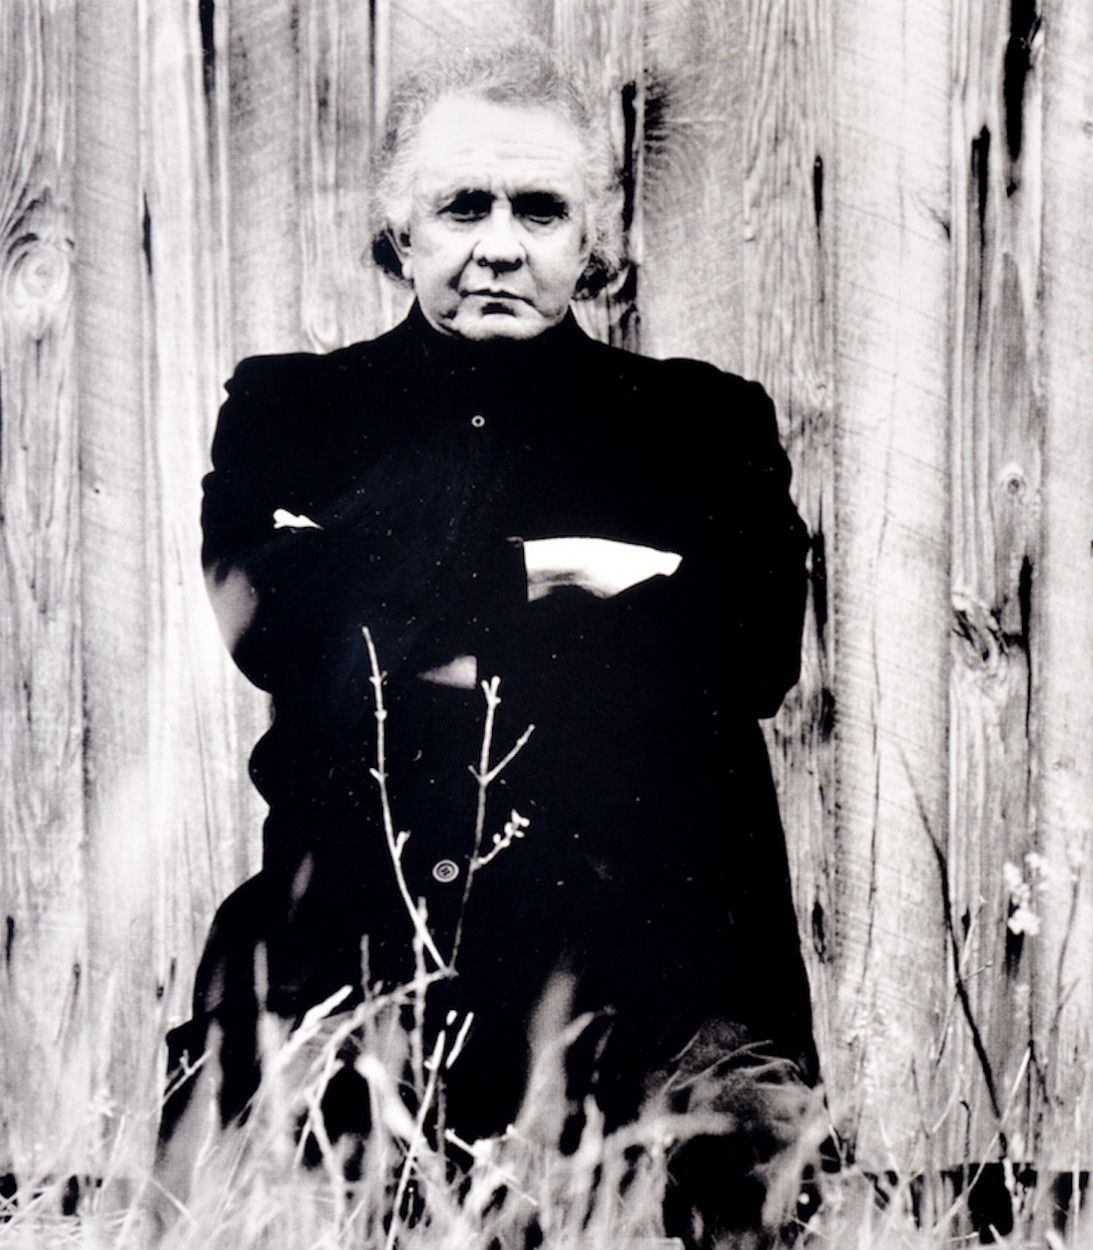 Johnny Cash American II: Unchained Album Cover